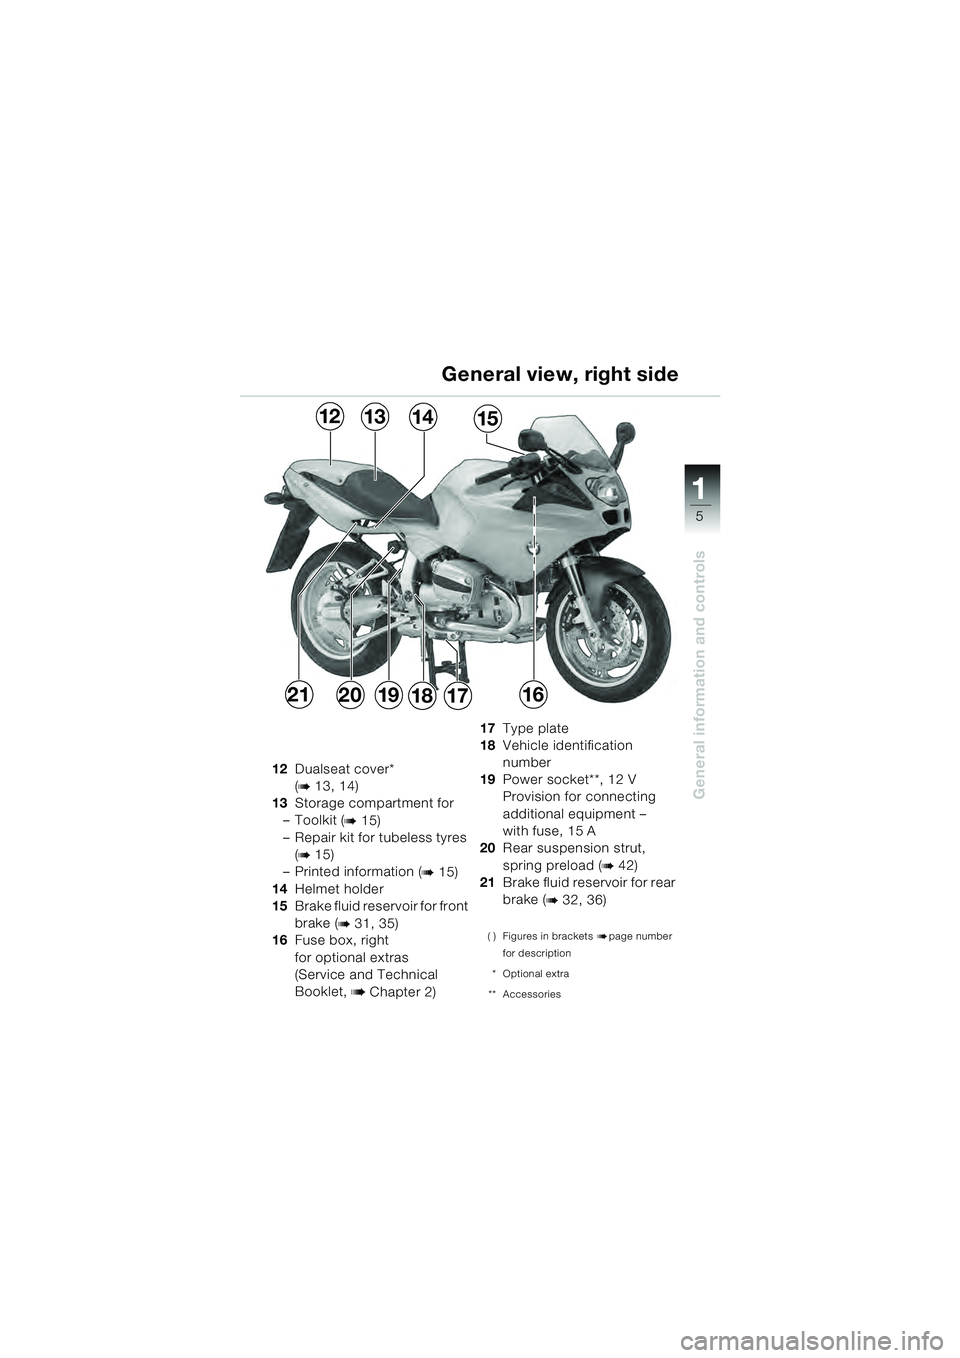 BMW MOTORRAD R 1100 S 2000  Riders Manual (in English) 11
5
General information and controls
12Dualseat cover* 
(
b 13, 14)
13 Storage compartment for
– Toolkit (
b 15)
– Repair kit for tubeless tyres  (
b 15)
– Printed information (
b 15)
14 Helmet